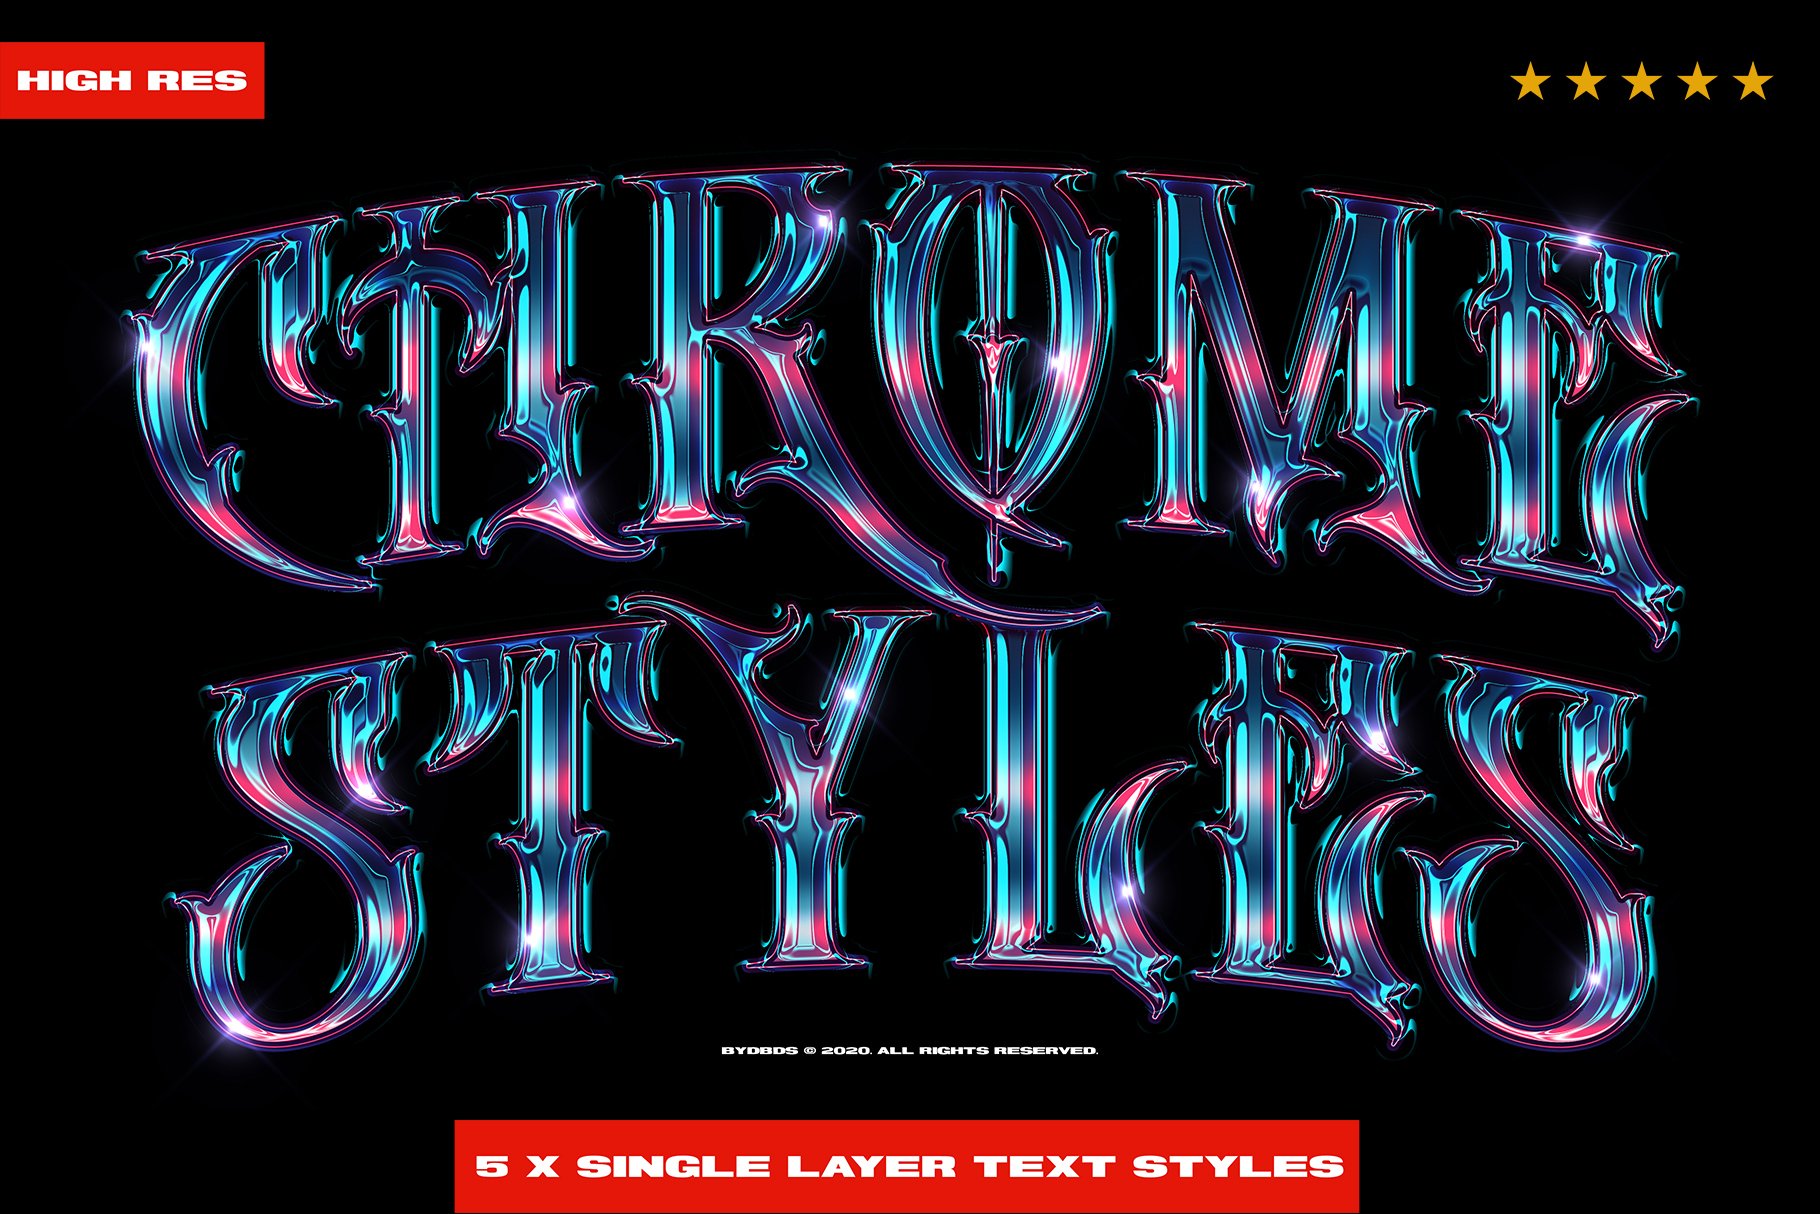 Chrome Text Styles 3.0cover image.